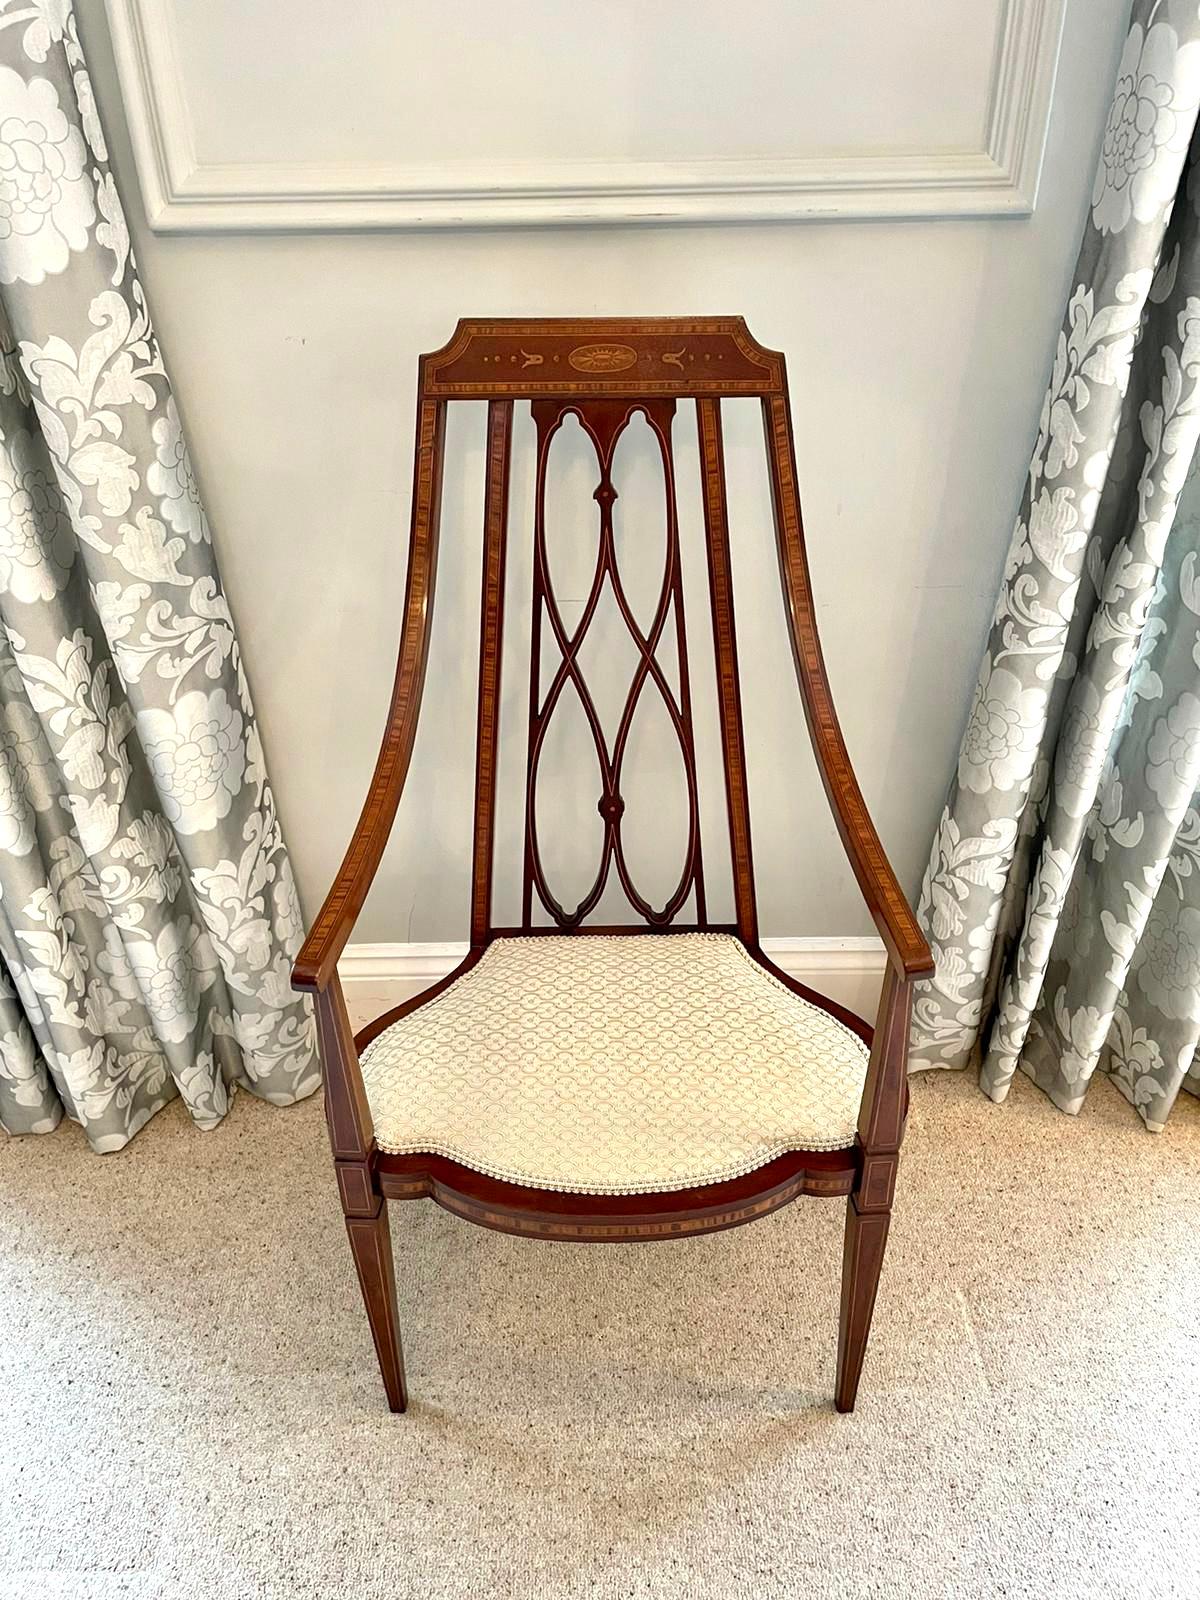 Unusual 19th century antique Victorian inlaid mahogany armchair having an appealing shaped top rail with satinwood inlay and unusual pretty shaped open arms with satinwood inlay. The shaped pierced centre splat has been beautifully inlaid also in